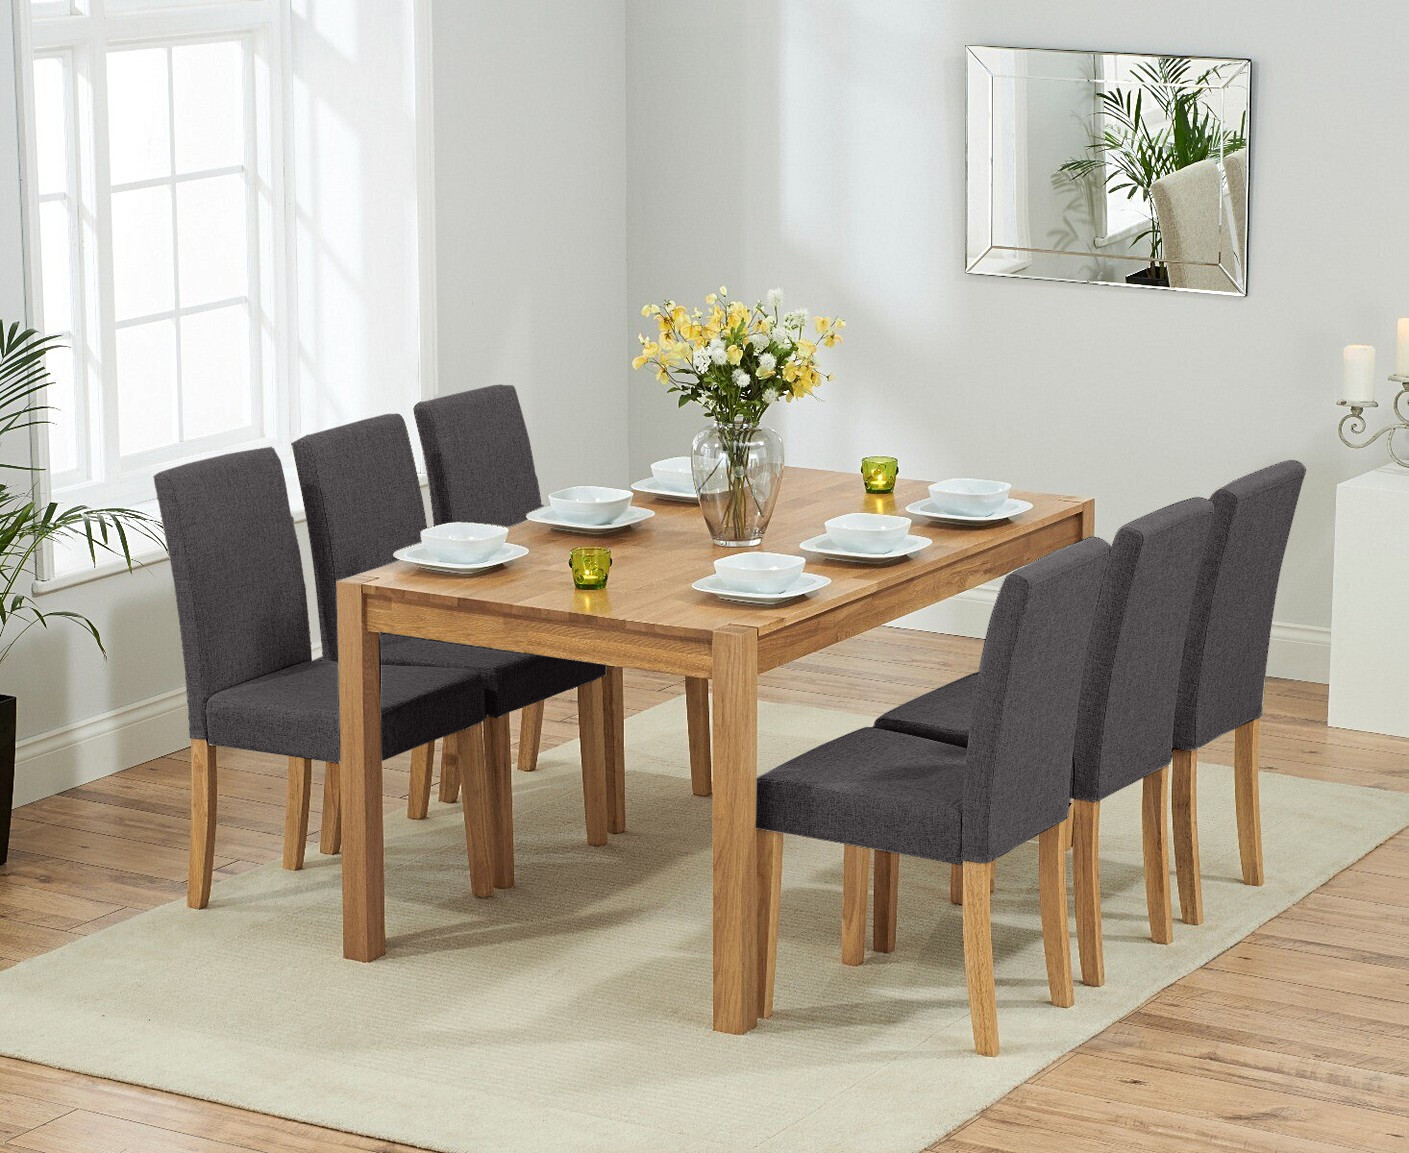 Photo 2 of York 150cm solid oak dining table with 8 grey lila chairs